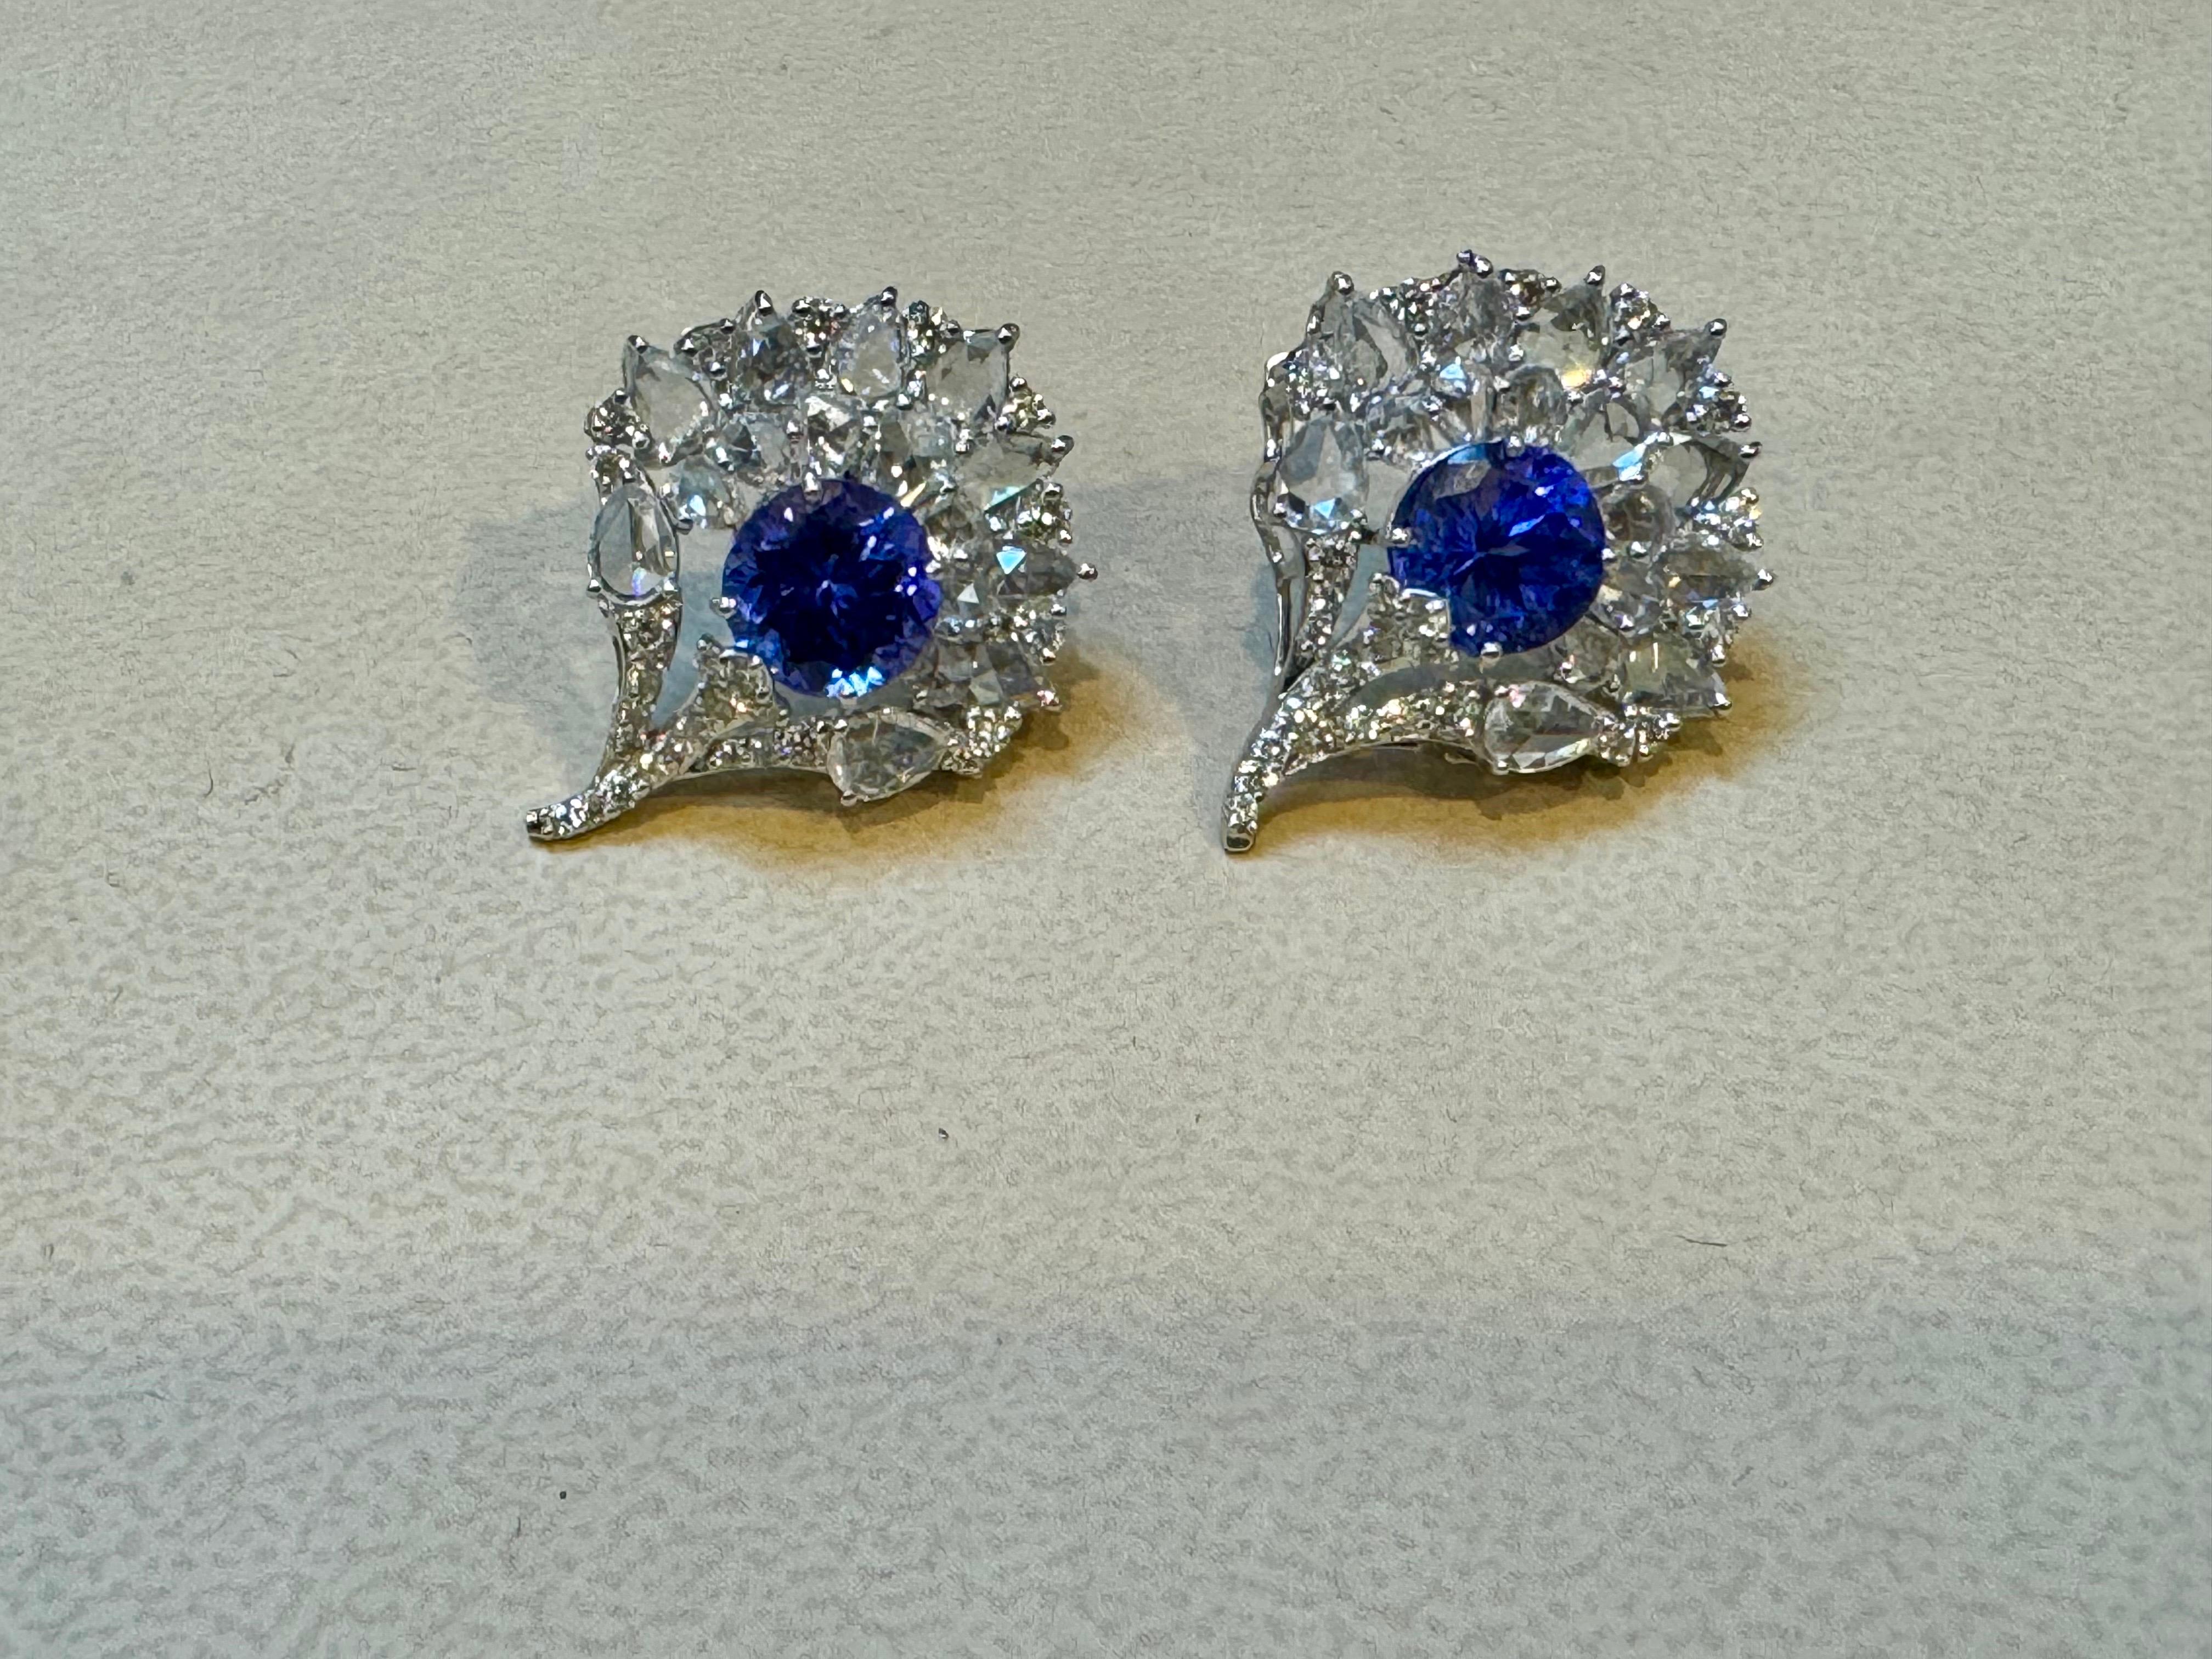 3.6 Ct  Round Tanzanite & 3.6 Ct Rose Cut Diamond Post Earrings in 18 Karat Gold In Excellent Condition For Sale In New York, NY